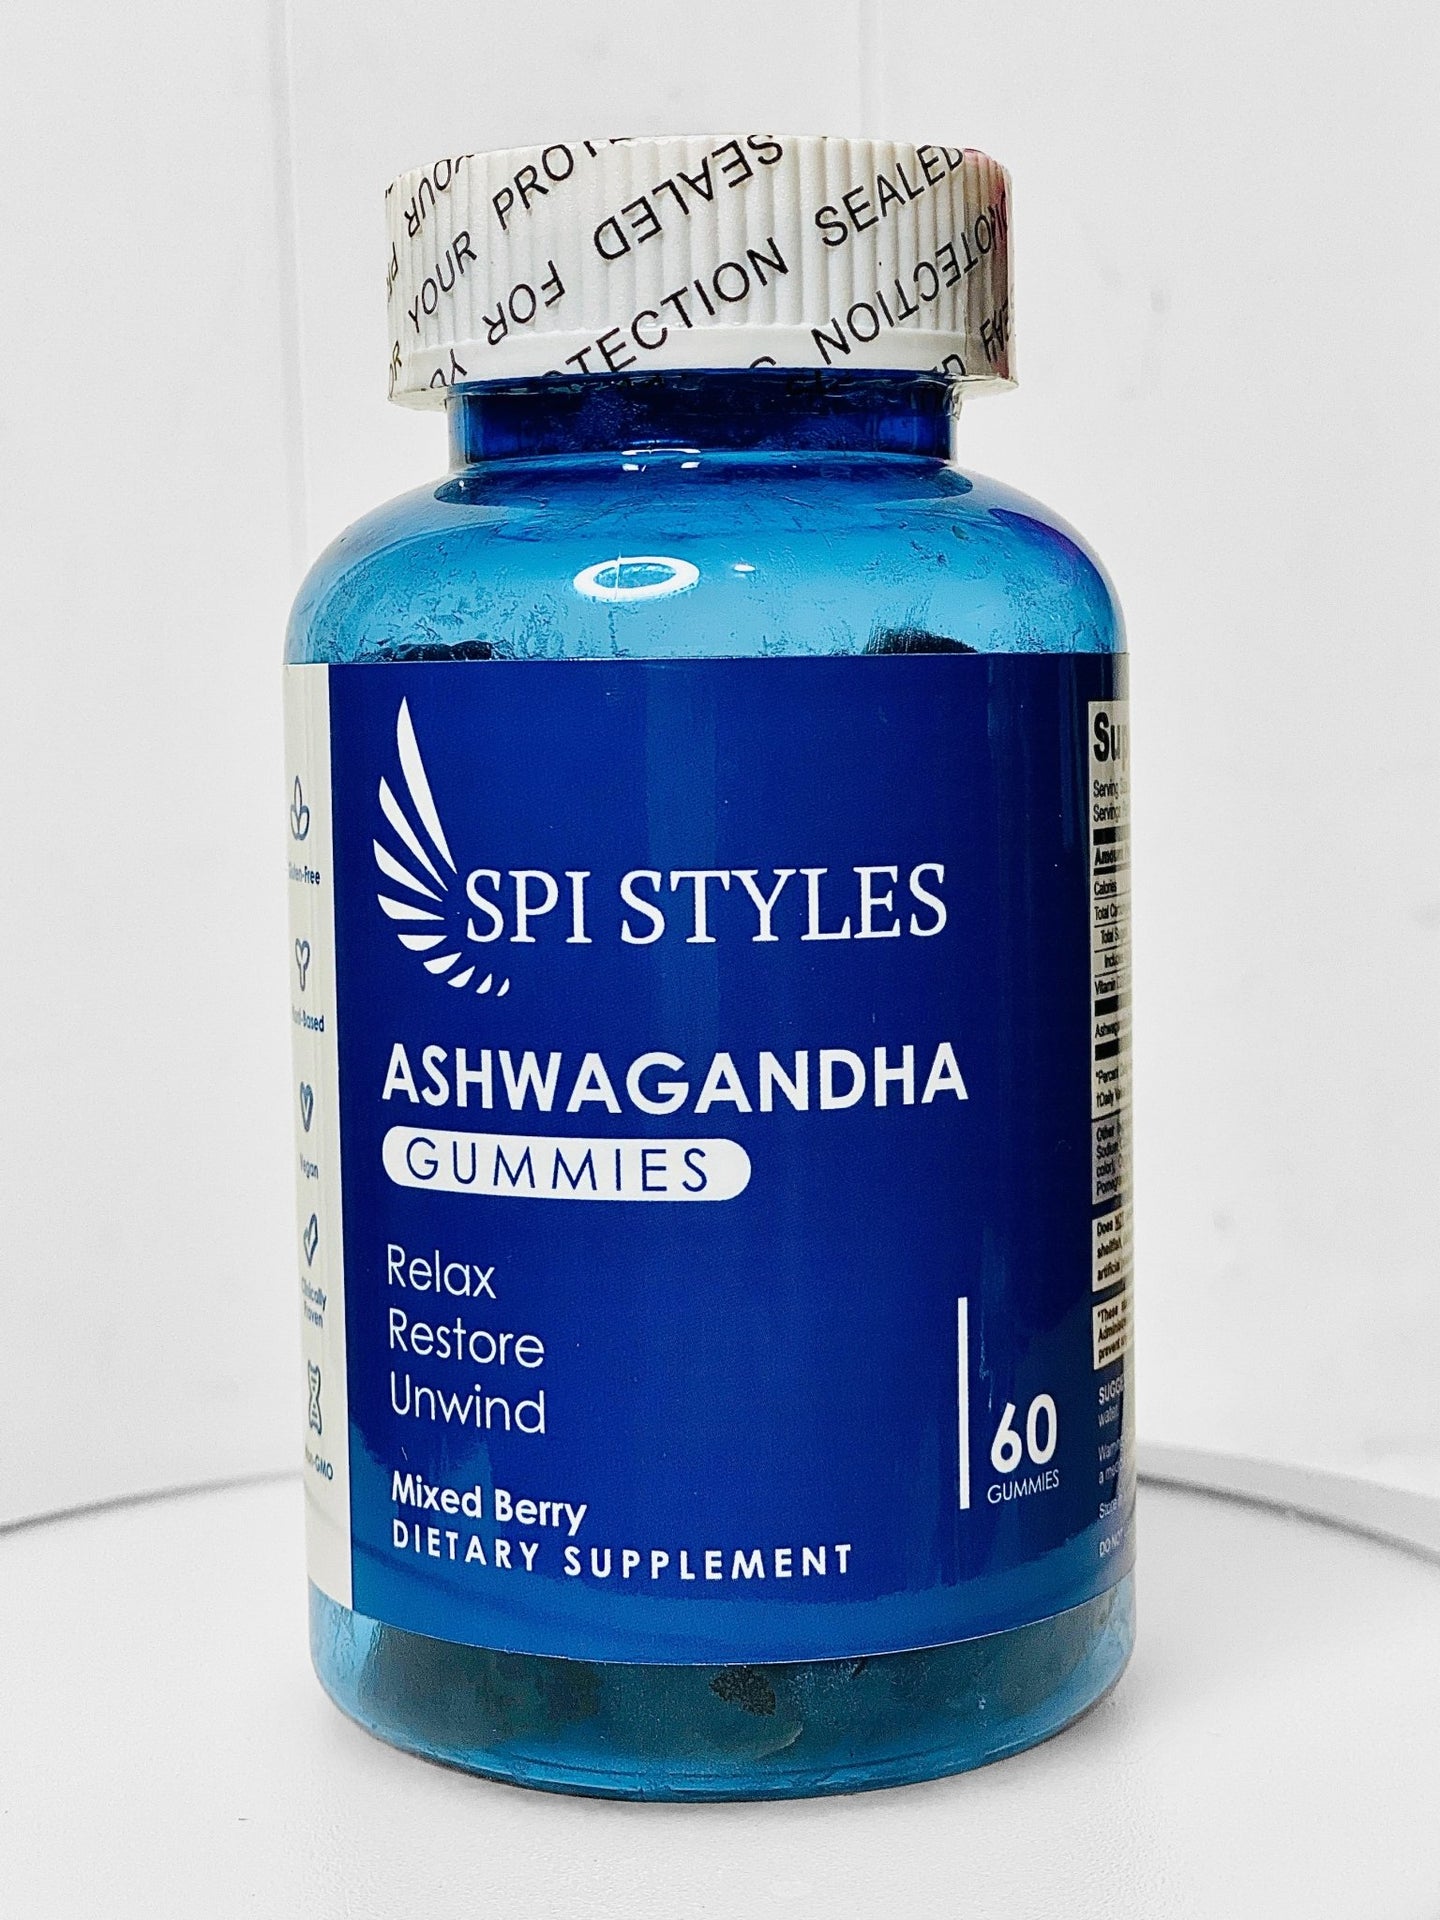 SPI Styles Ashwagandha Gummies help you relax and unwind